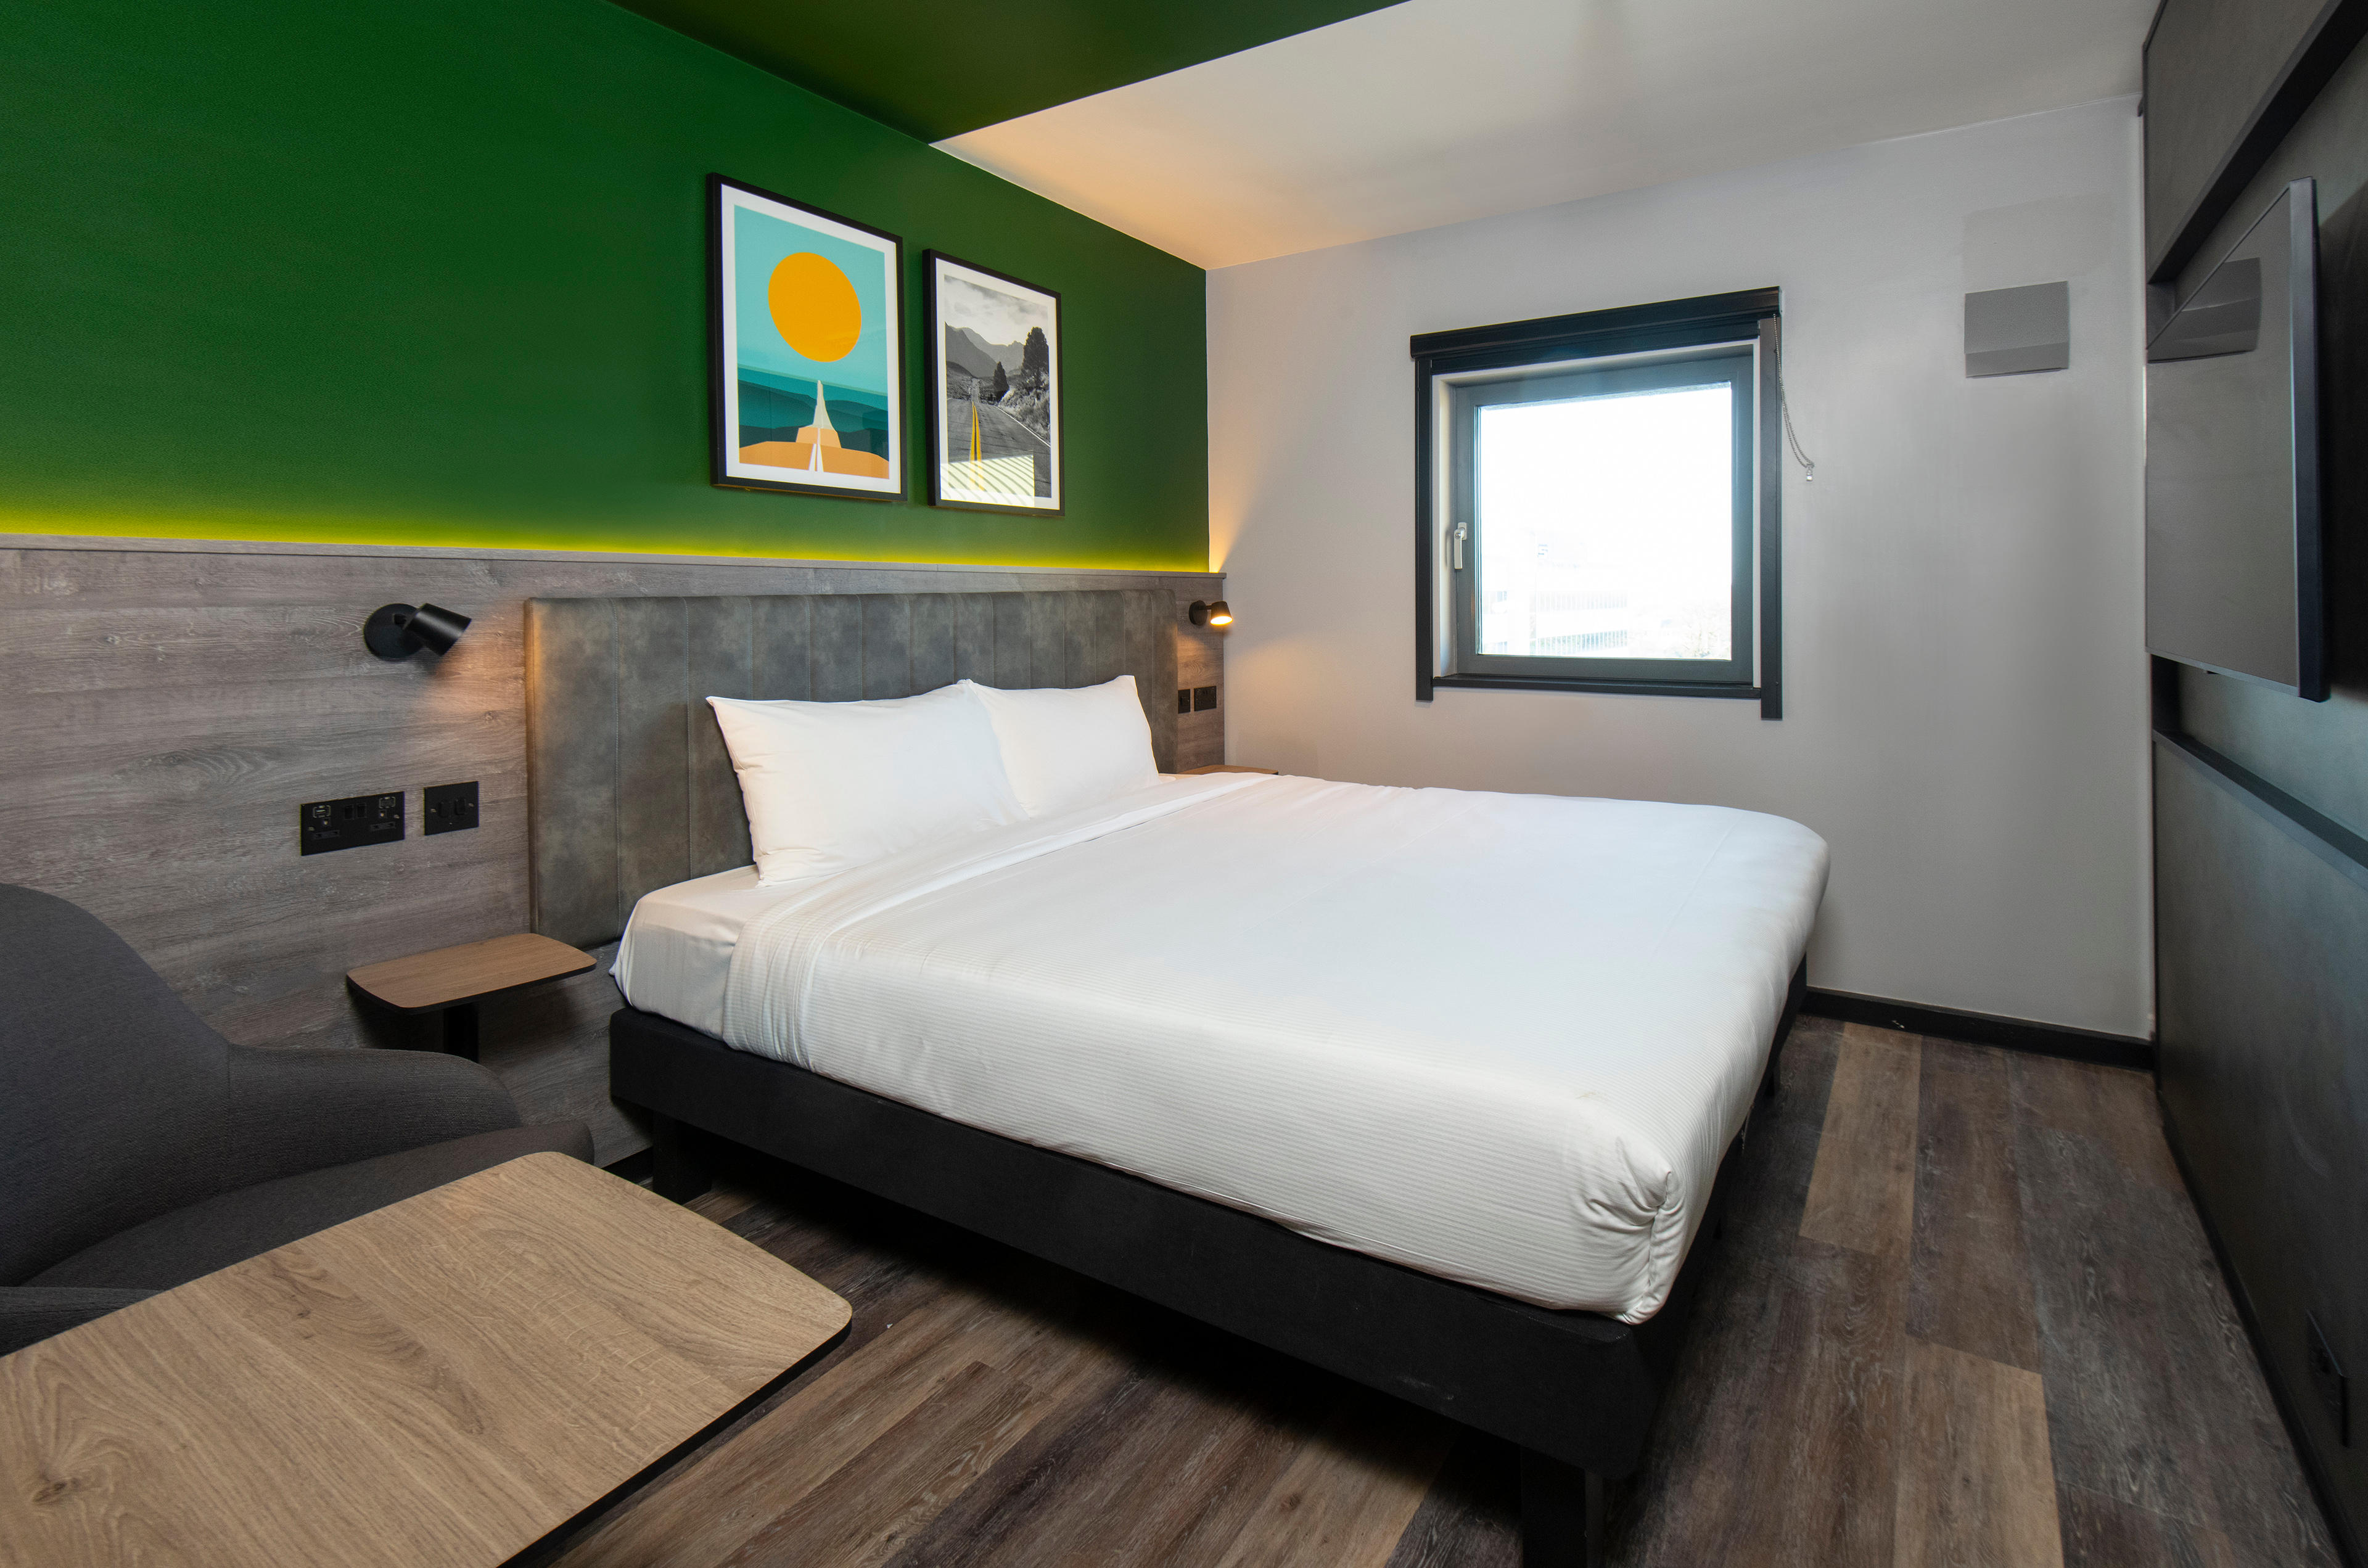 A double guest room ibis Styles London Gatwick Airport Gatwick 01293 590300